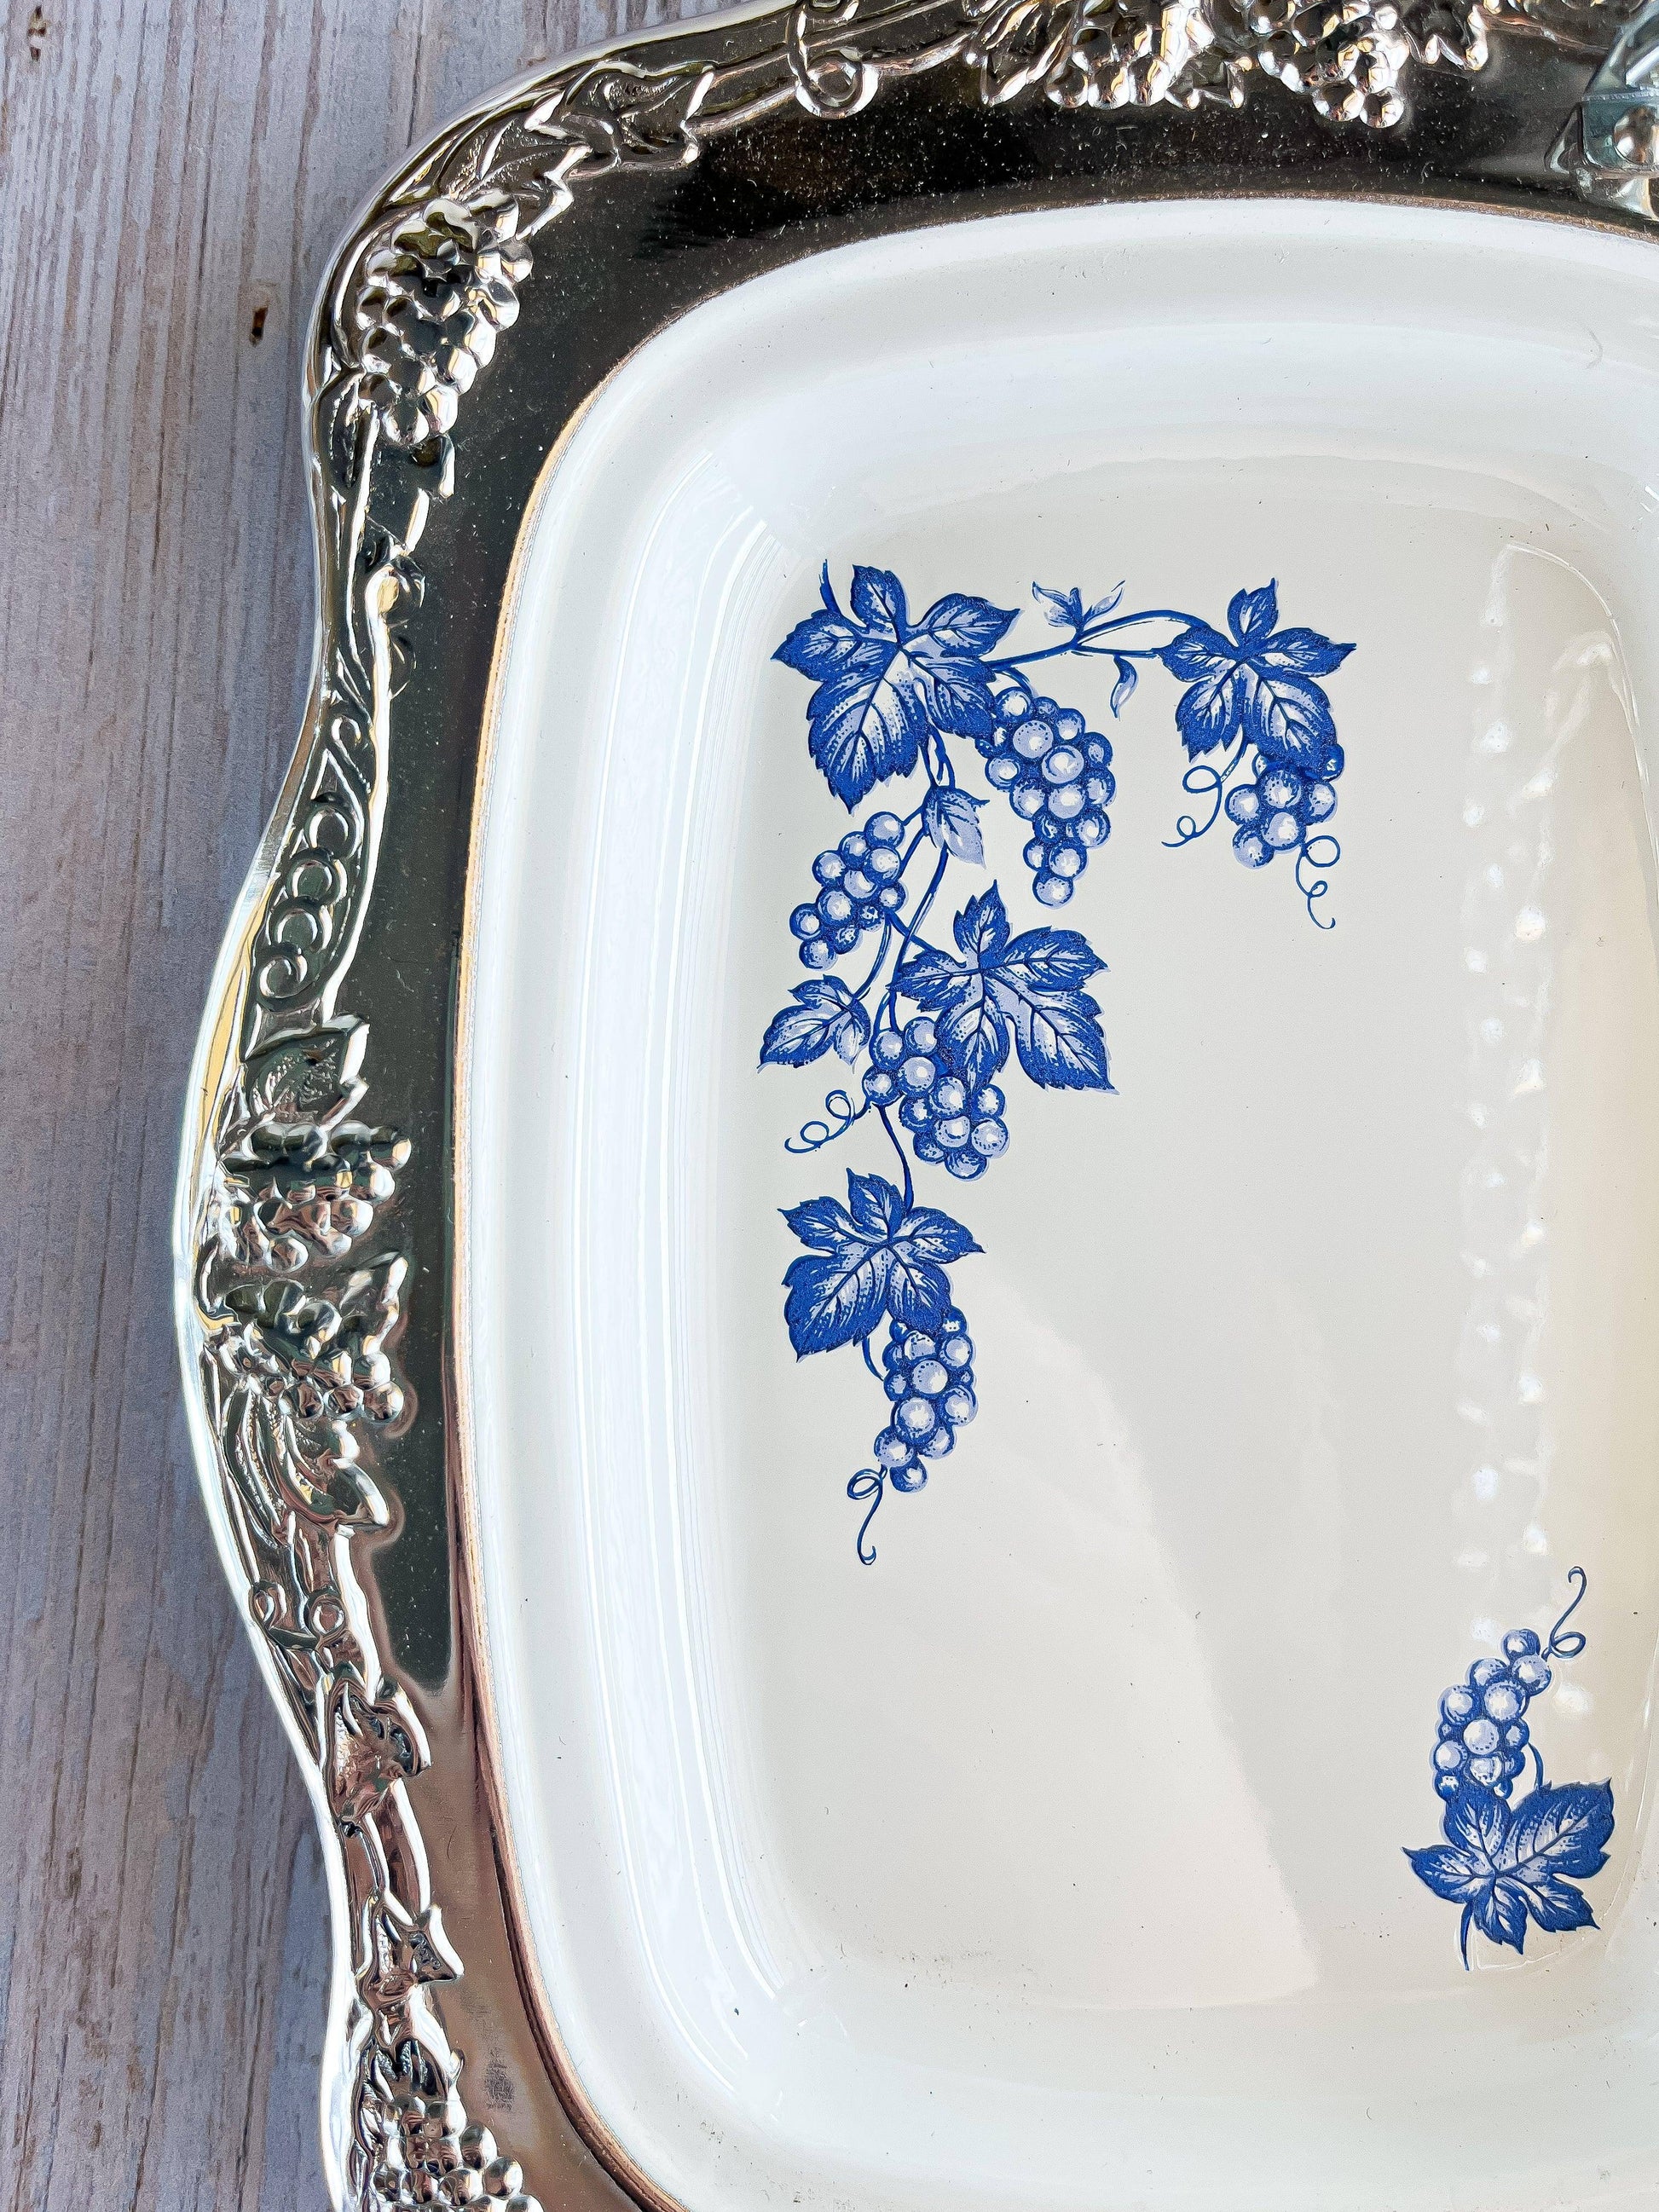 Elegant Dual-Compartment Serving Tray with Ceramic Dishes - Blue Grapevine - SOSC Home